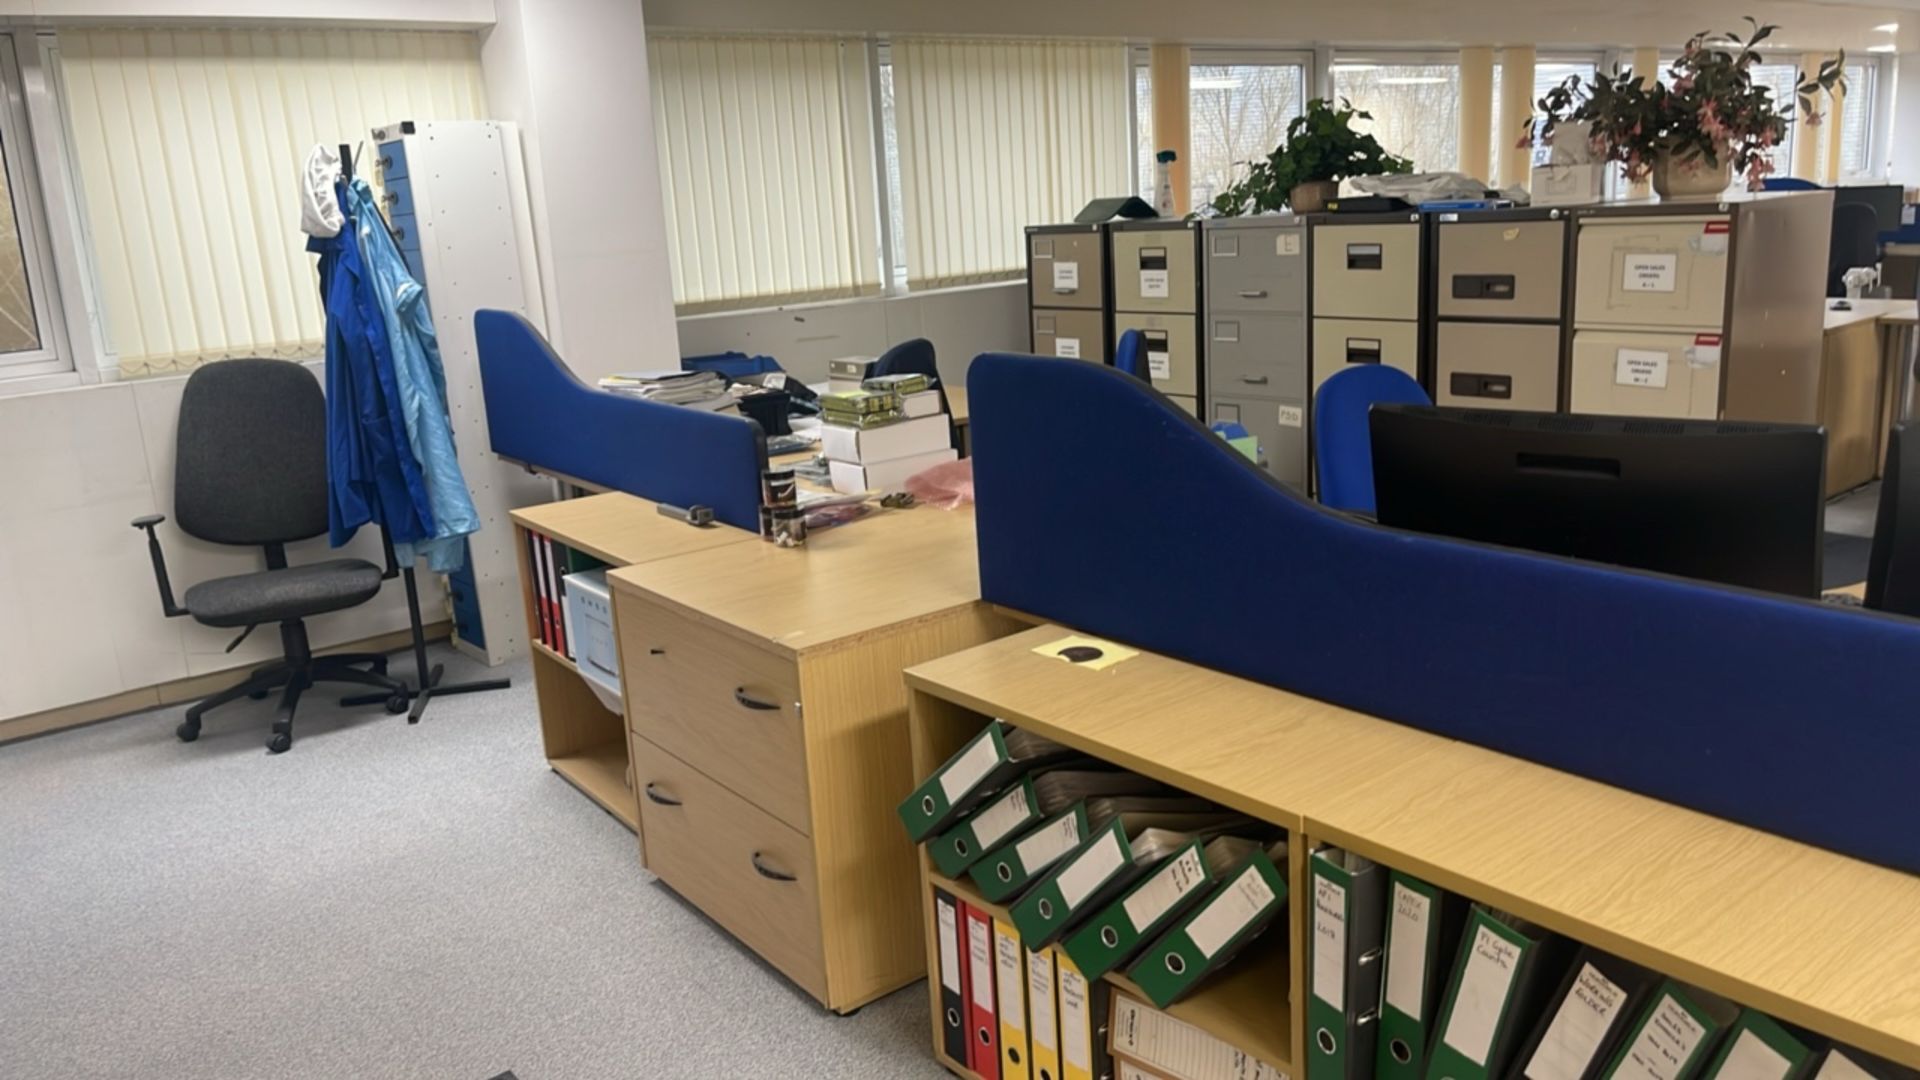 Open Plan Office Area Furniture - Image 6 of 6